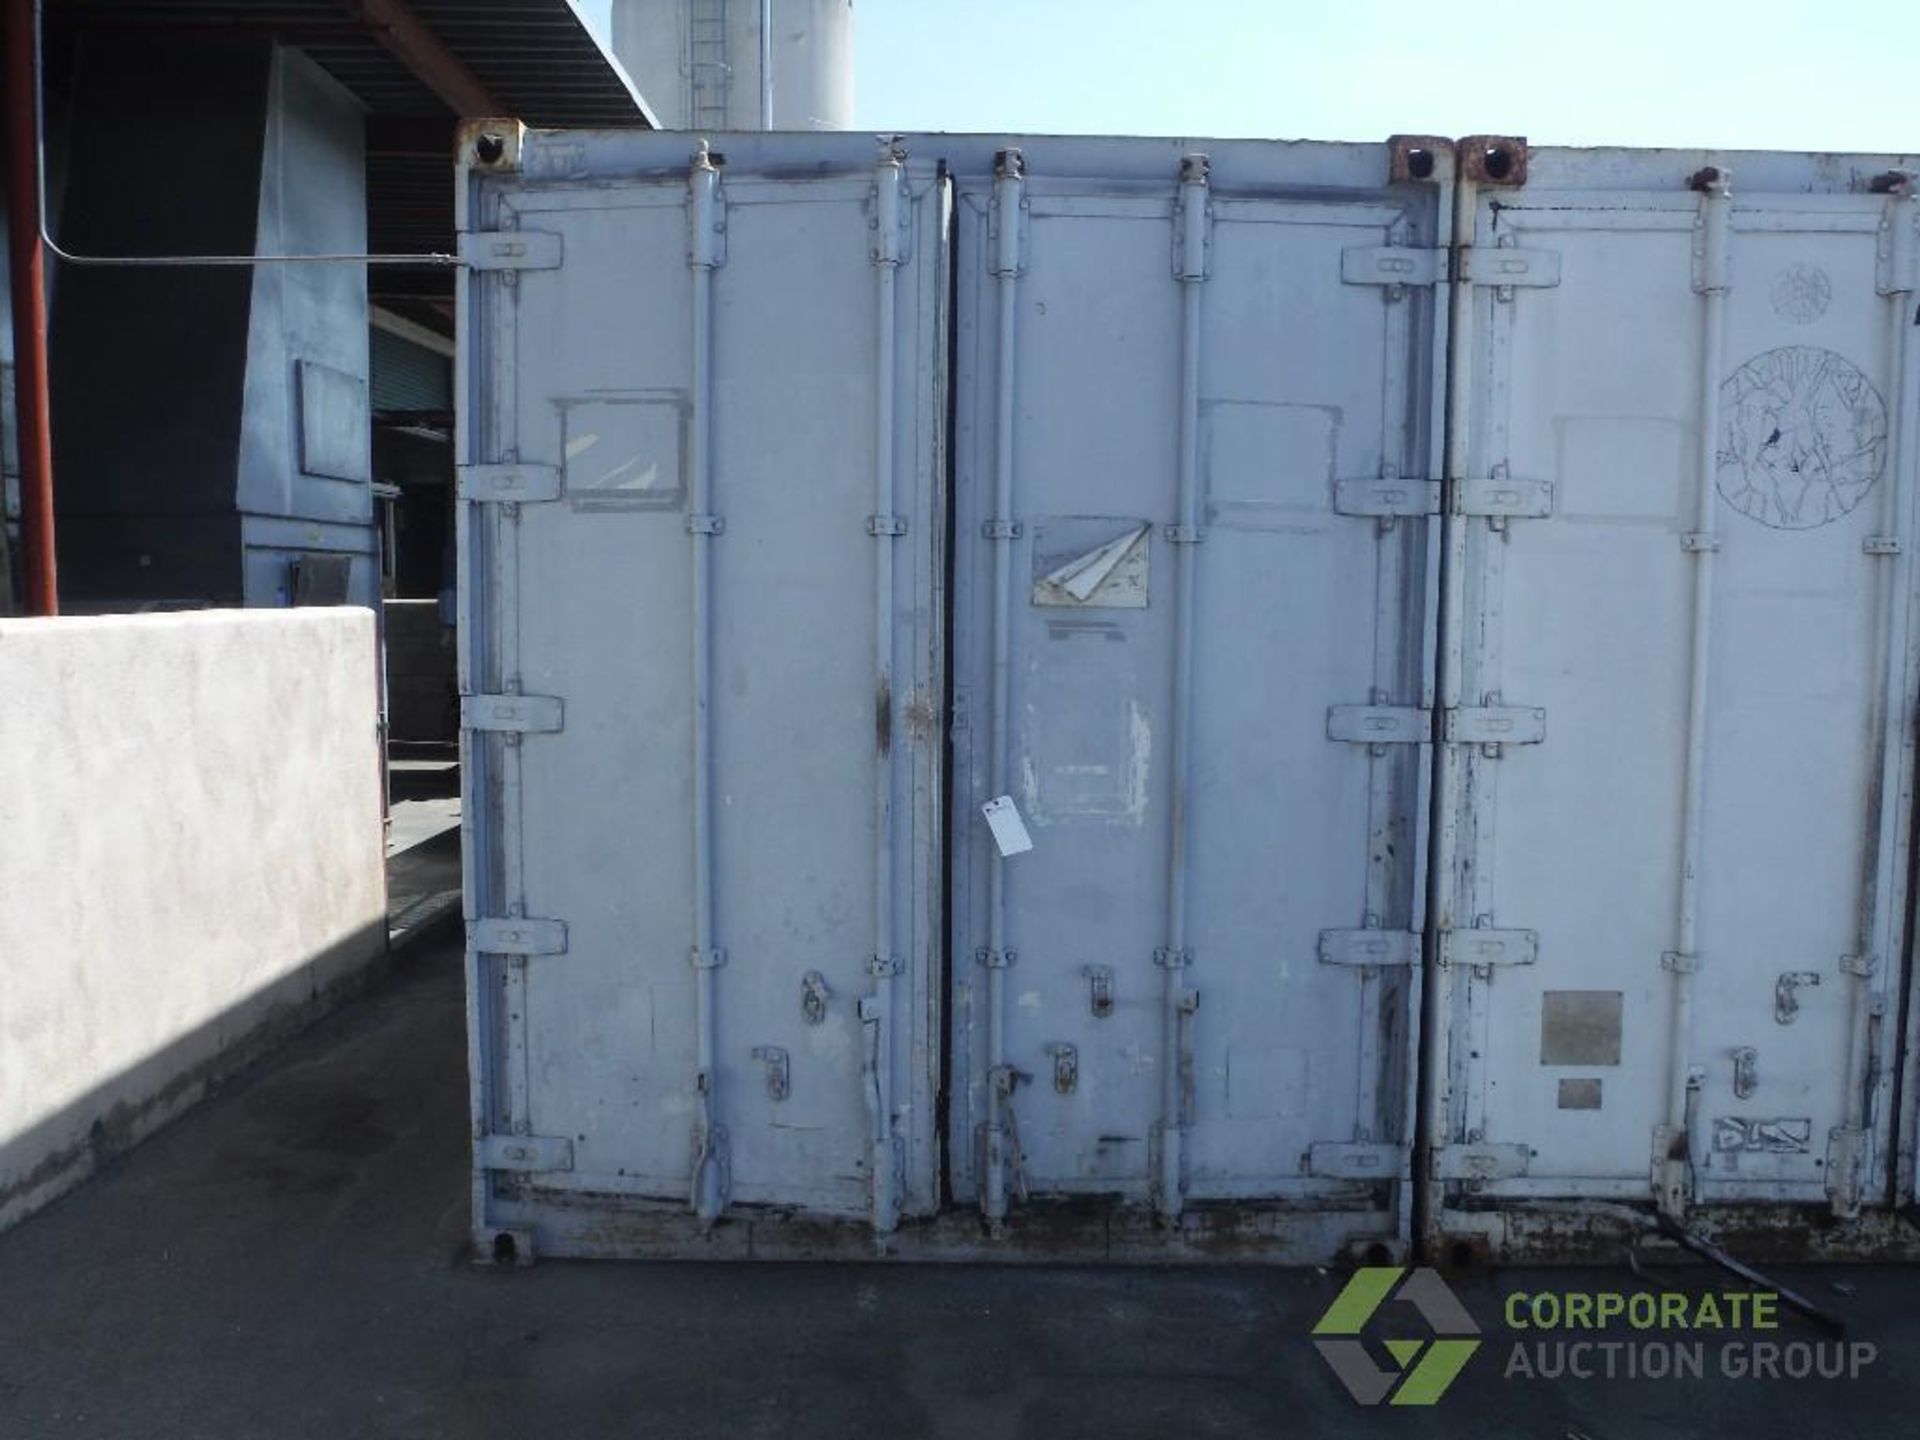 Refrigerated shipping container, 40 ft. x 96 in. wide x 114 in. tall